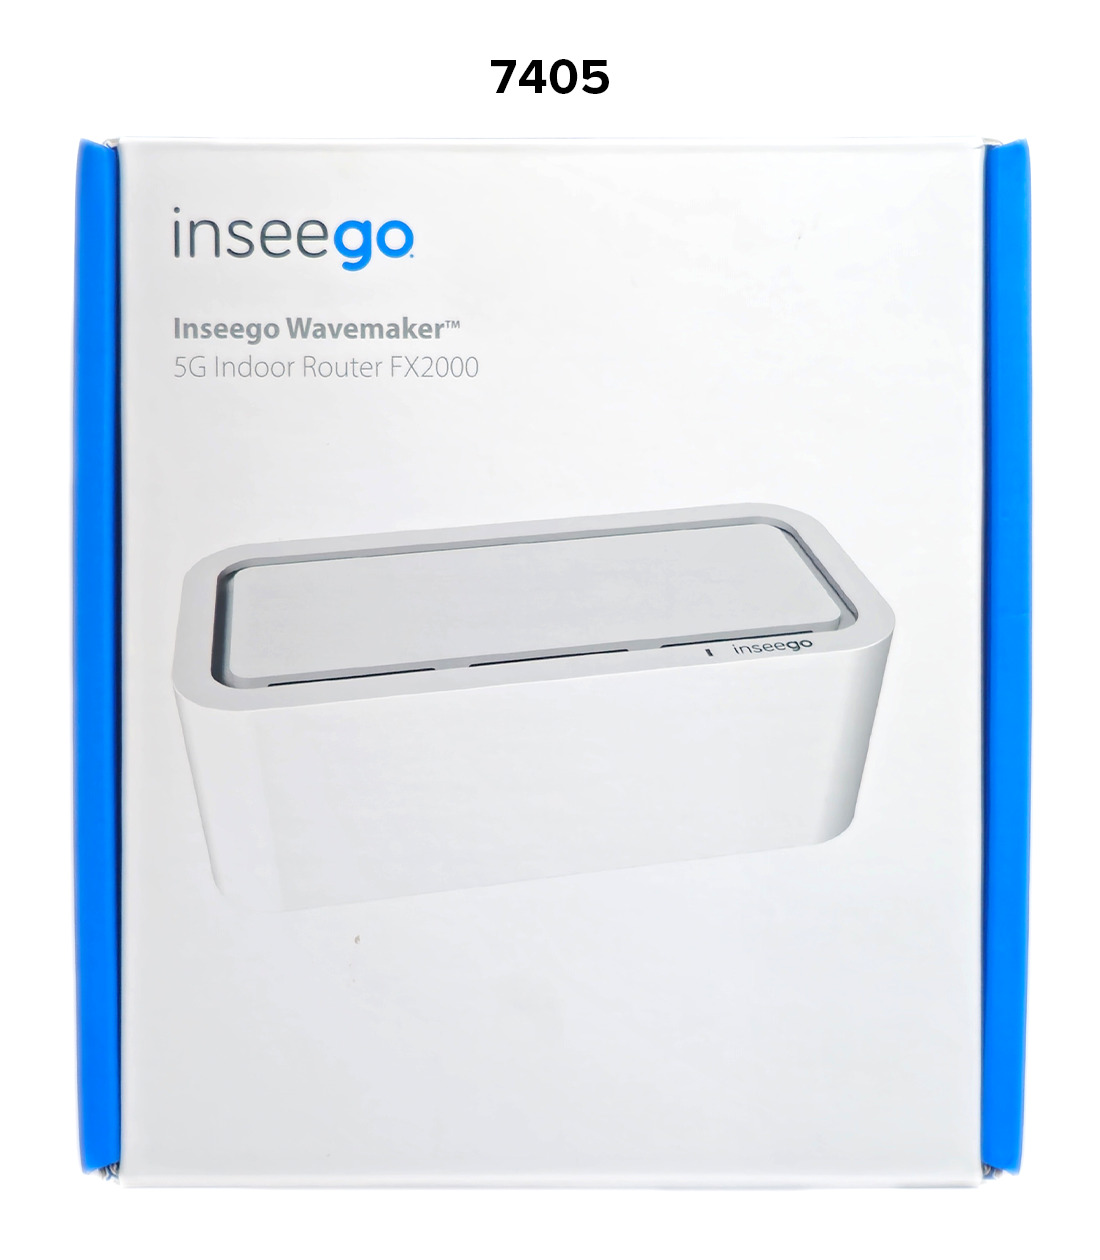 Inseego Wavemaker 5G Indoor Wi-Fi Router - White - FX2000-3 *AS-IS/FOR PARTS*